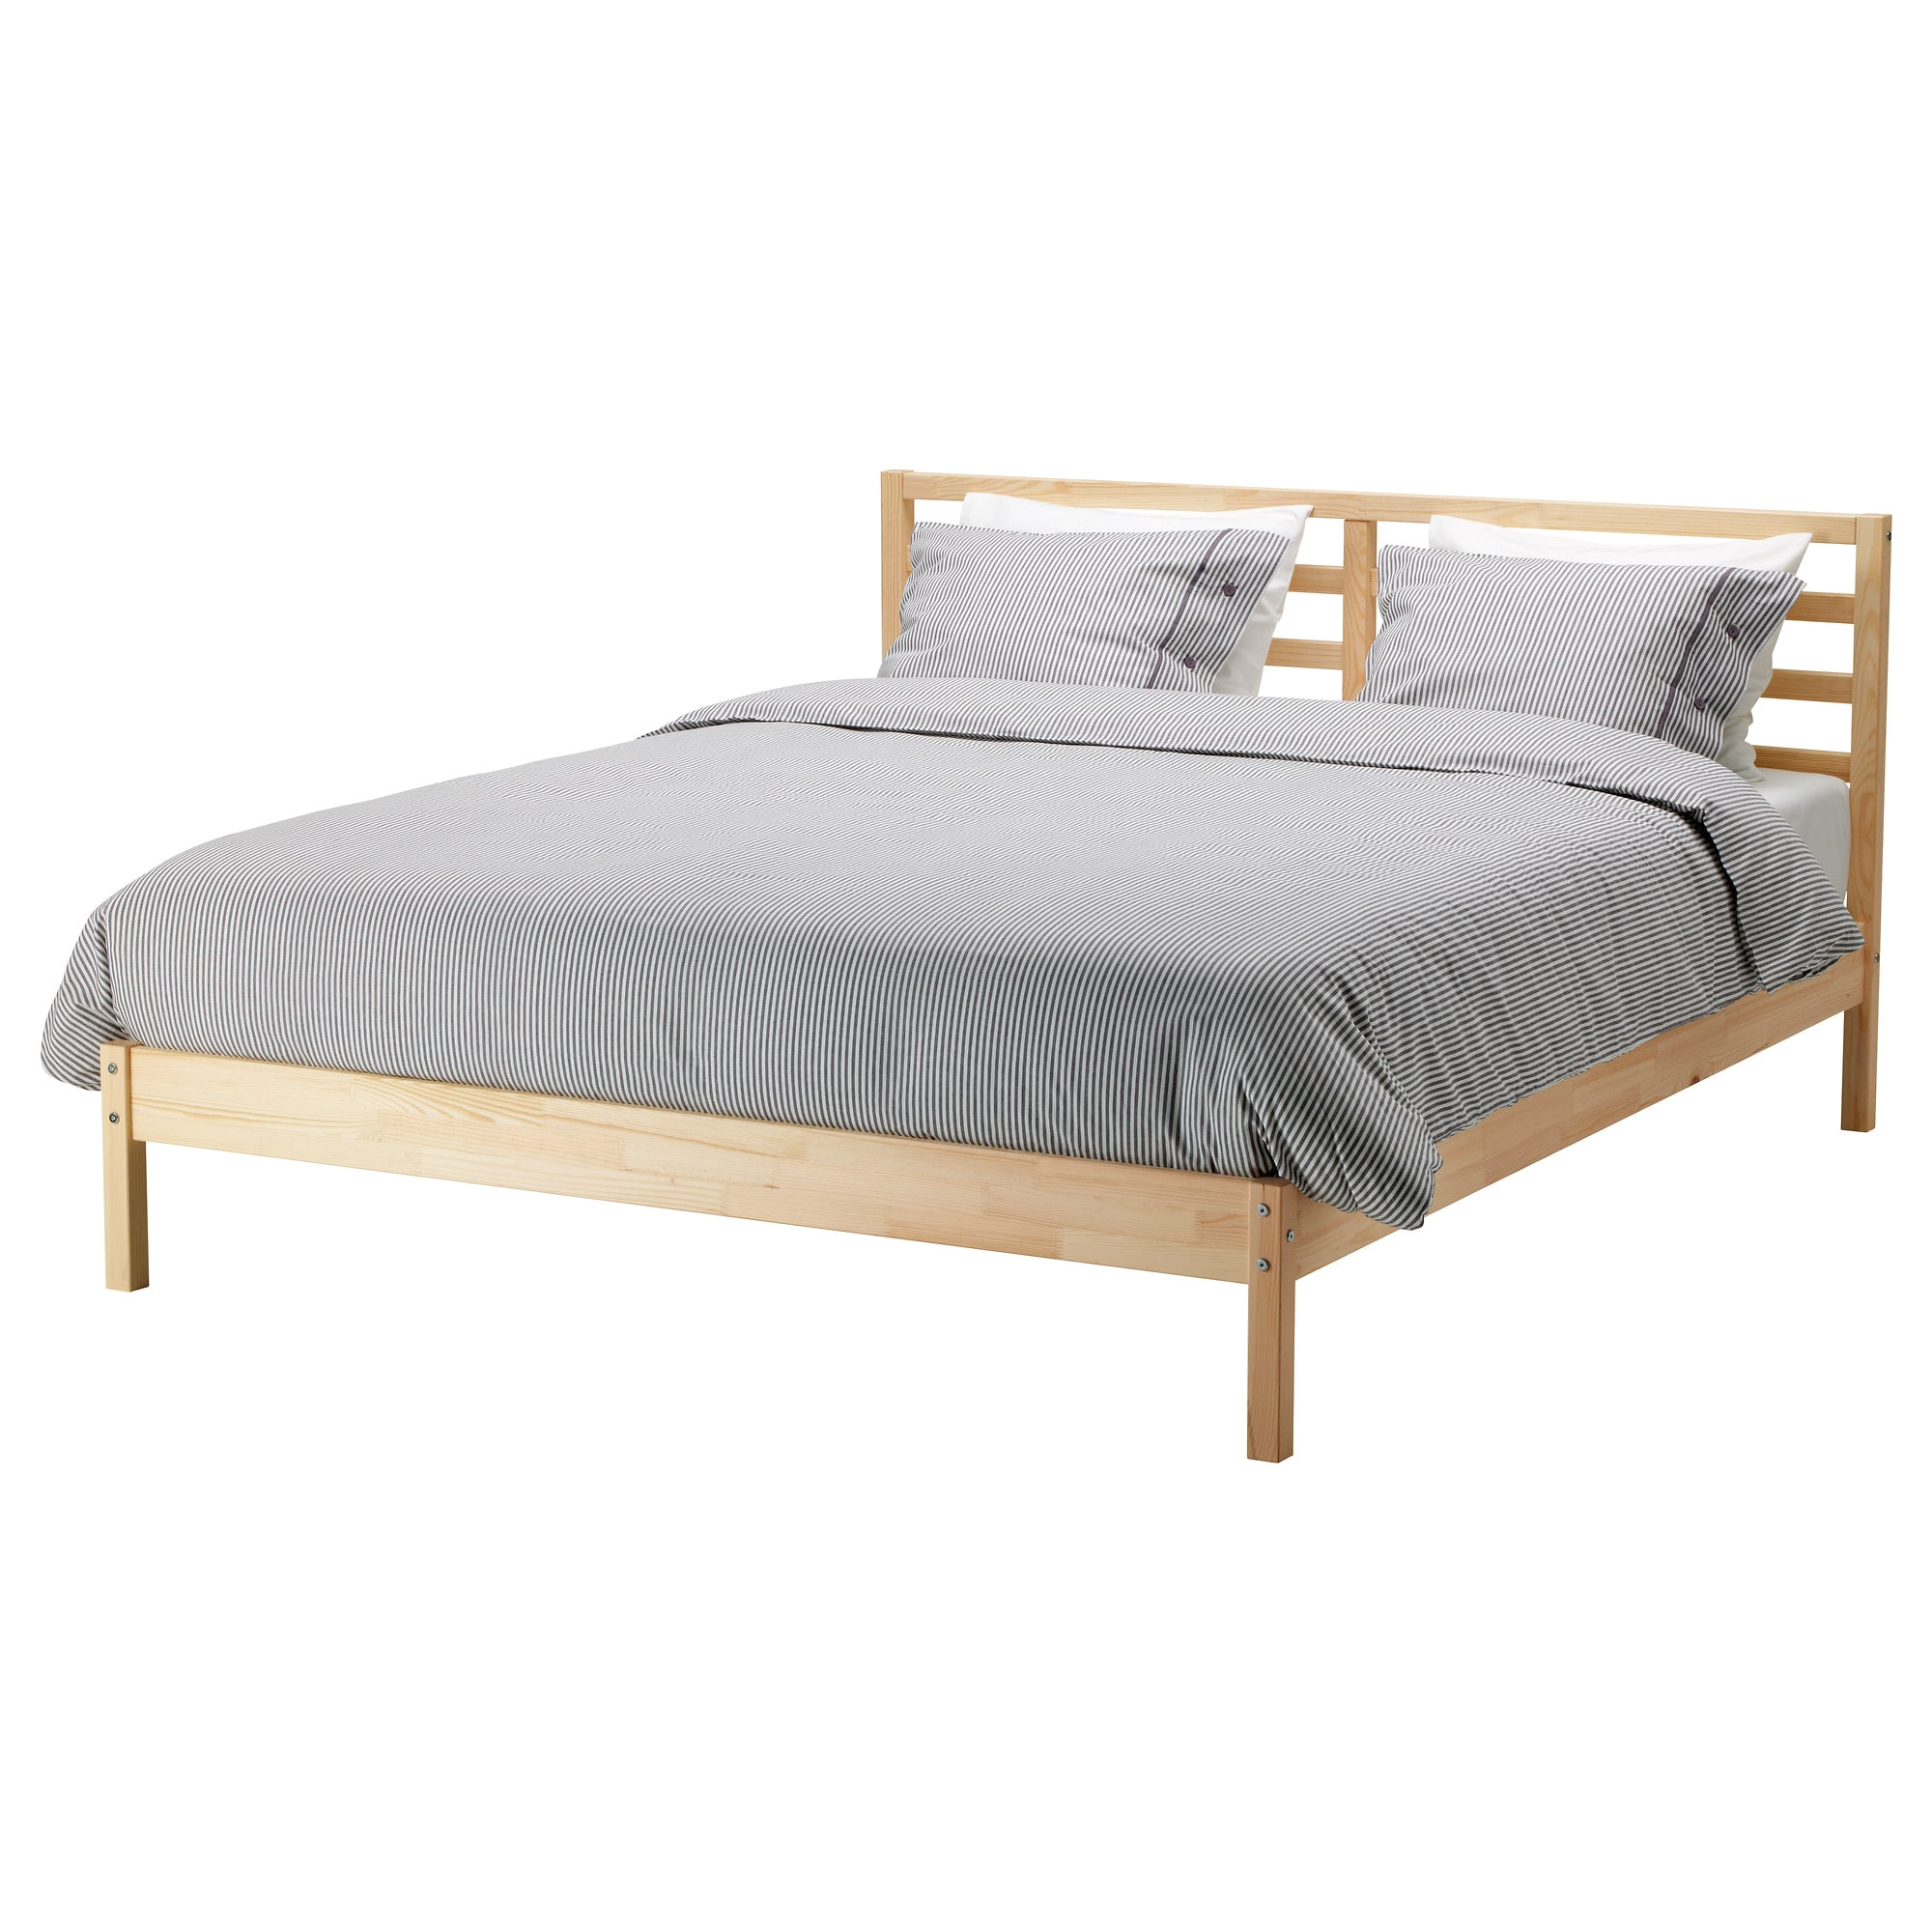 ikea tarva bed frame made of solid wood which is a hardwearing and warm natural